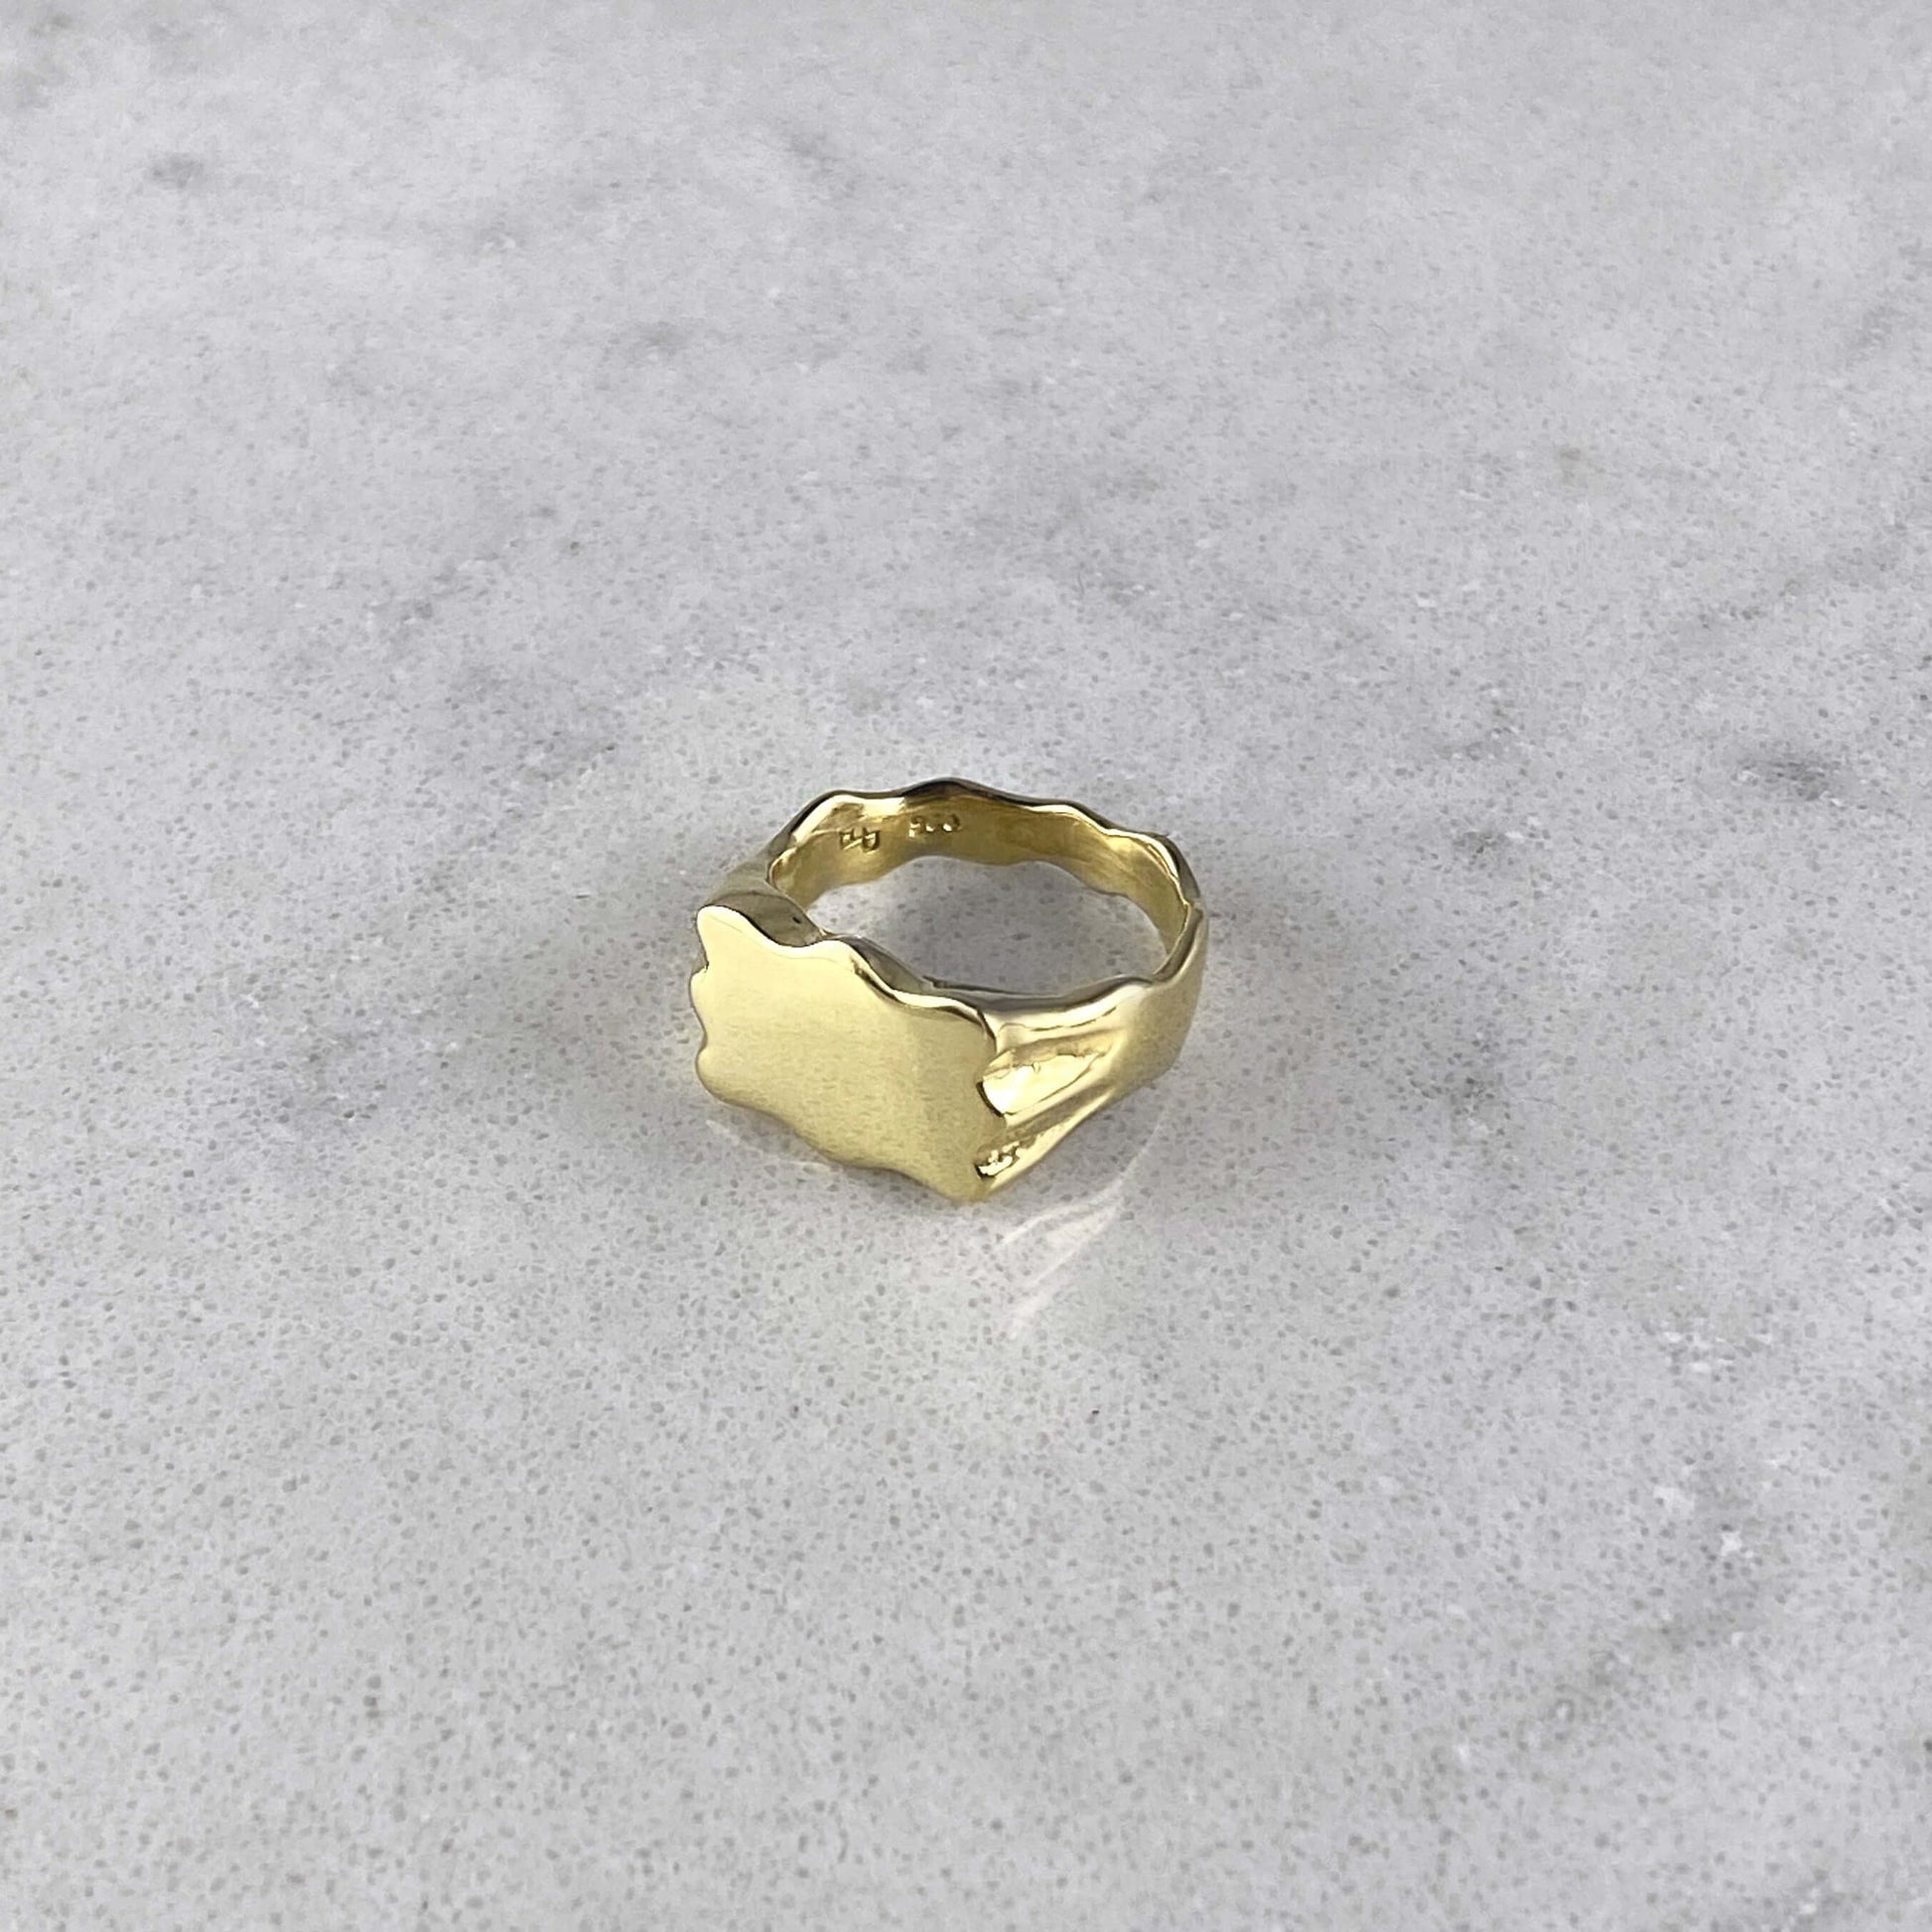 Product photo of a signet ring by Aur Studio in gold.